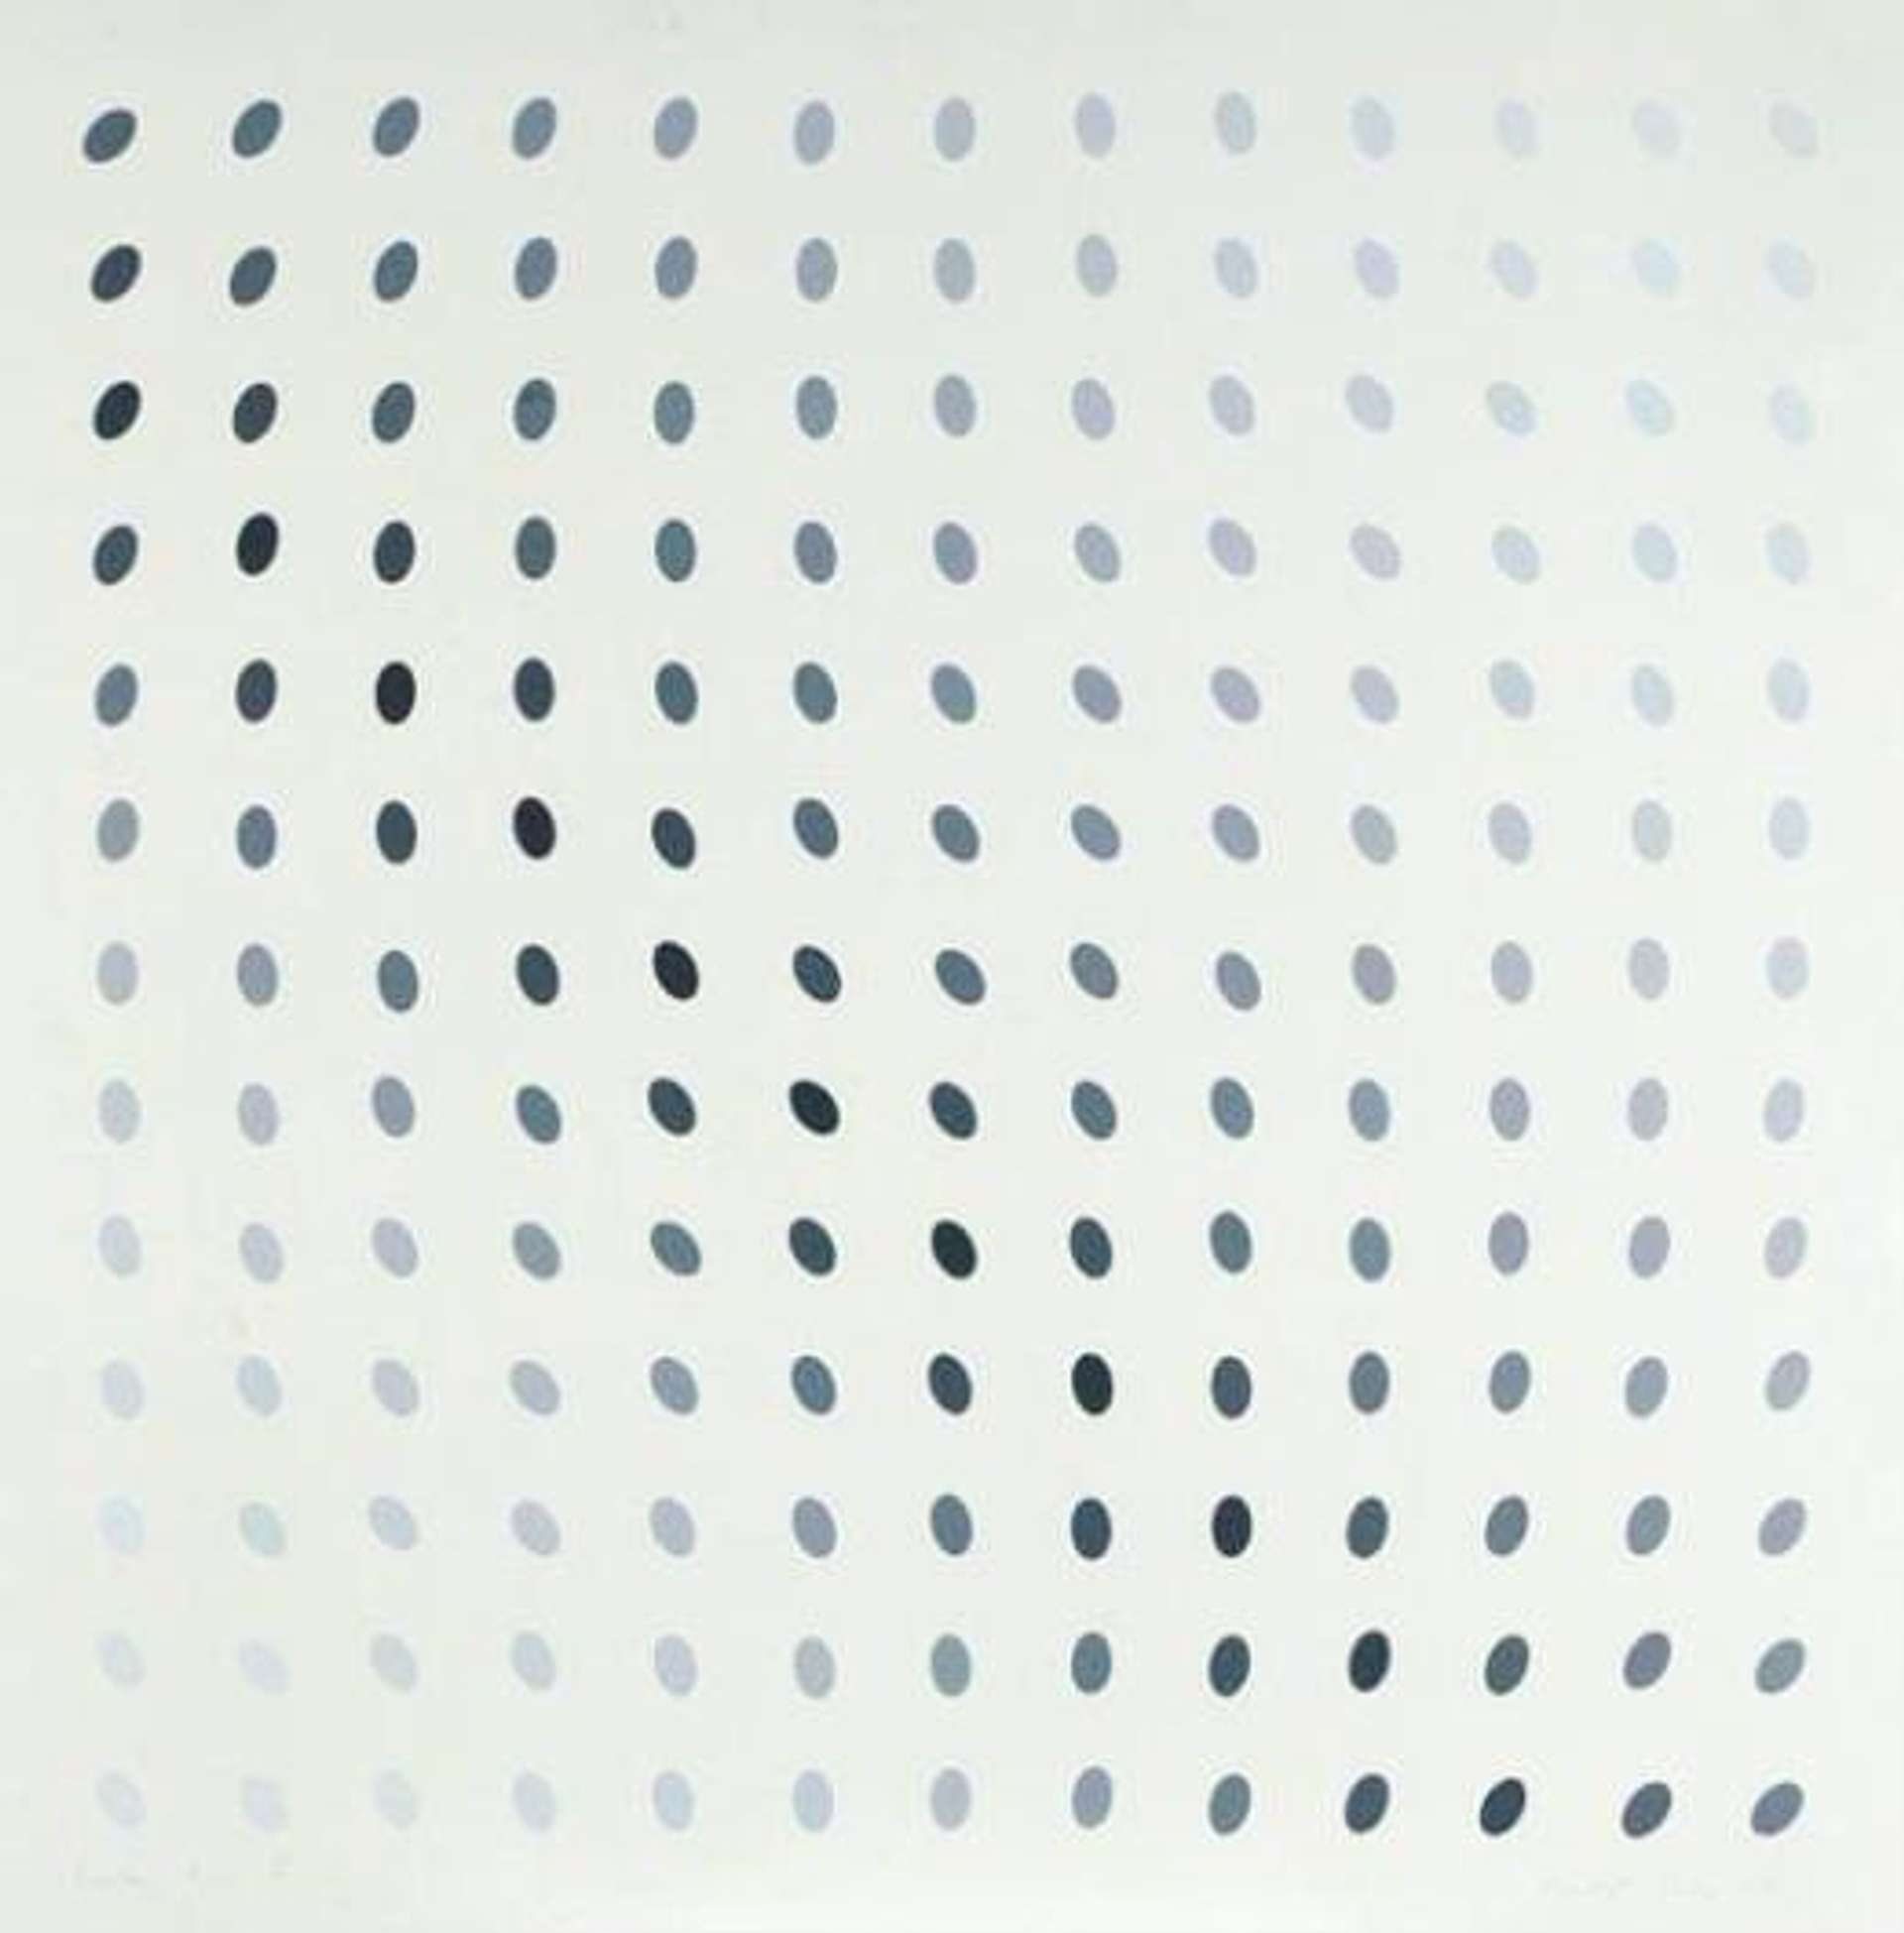 Nineteen Greys B, executed in 1968 and released in an edition of 75, depicts ovals of equal size, placed at equal intervals across the page, slanting at varying degrees. The hue of each circle darkens in tone as they reach the centre, creating a diagonal line of darker ovals across the page.